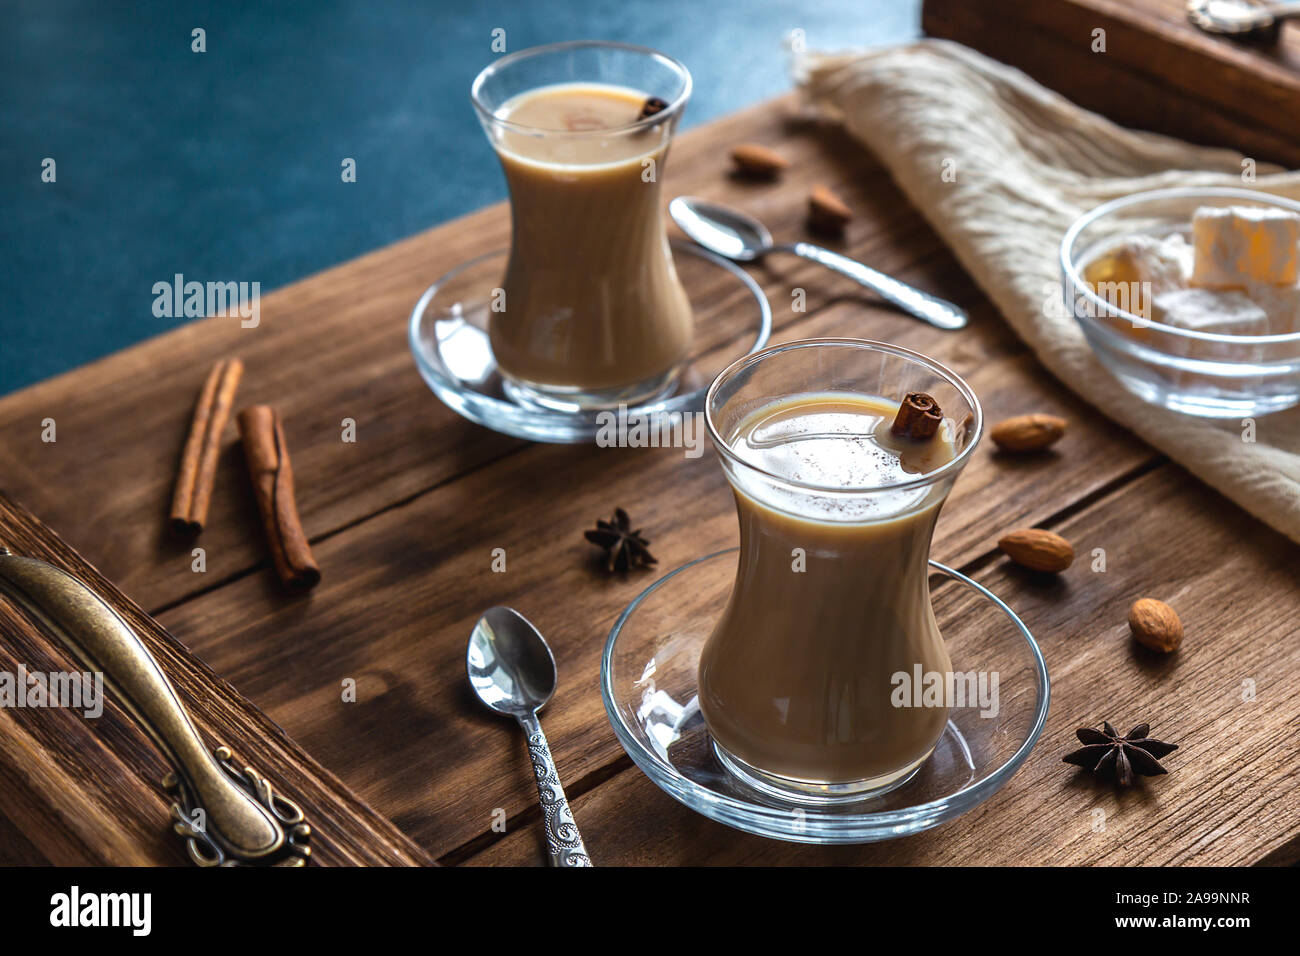 Indian tea with spices and milk. Masala chai in transparent glasses on a wooden tray. Horizontal orientation. Stock Photo